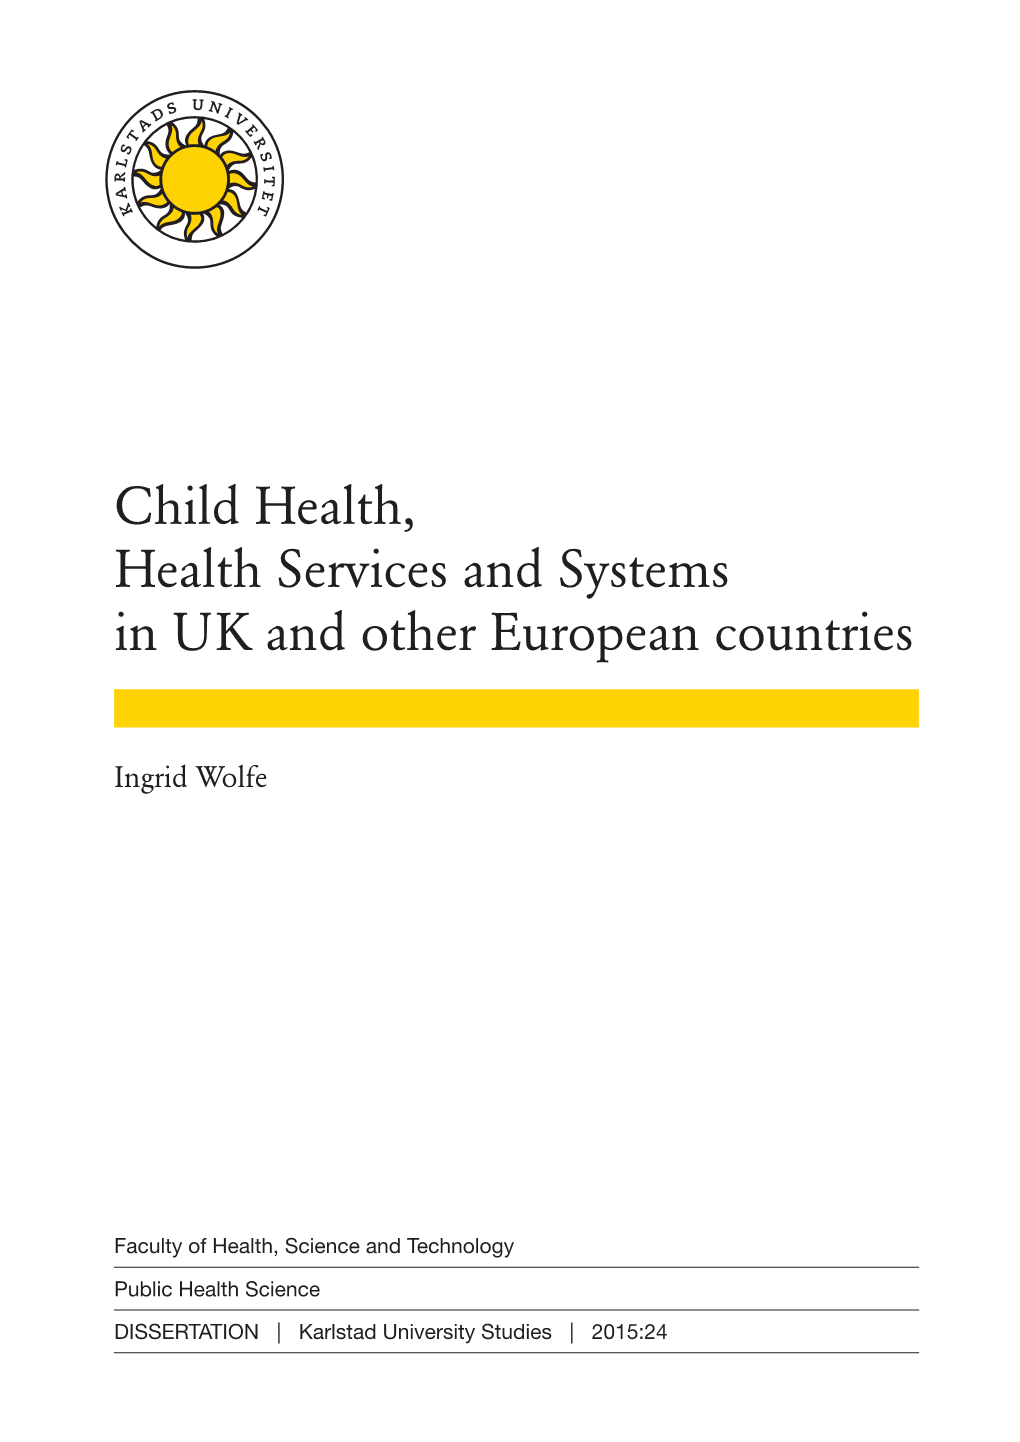 Child Health, Health Services and Systems in UK and Other European Countries